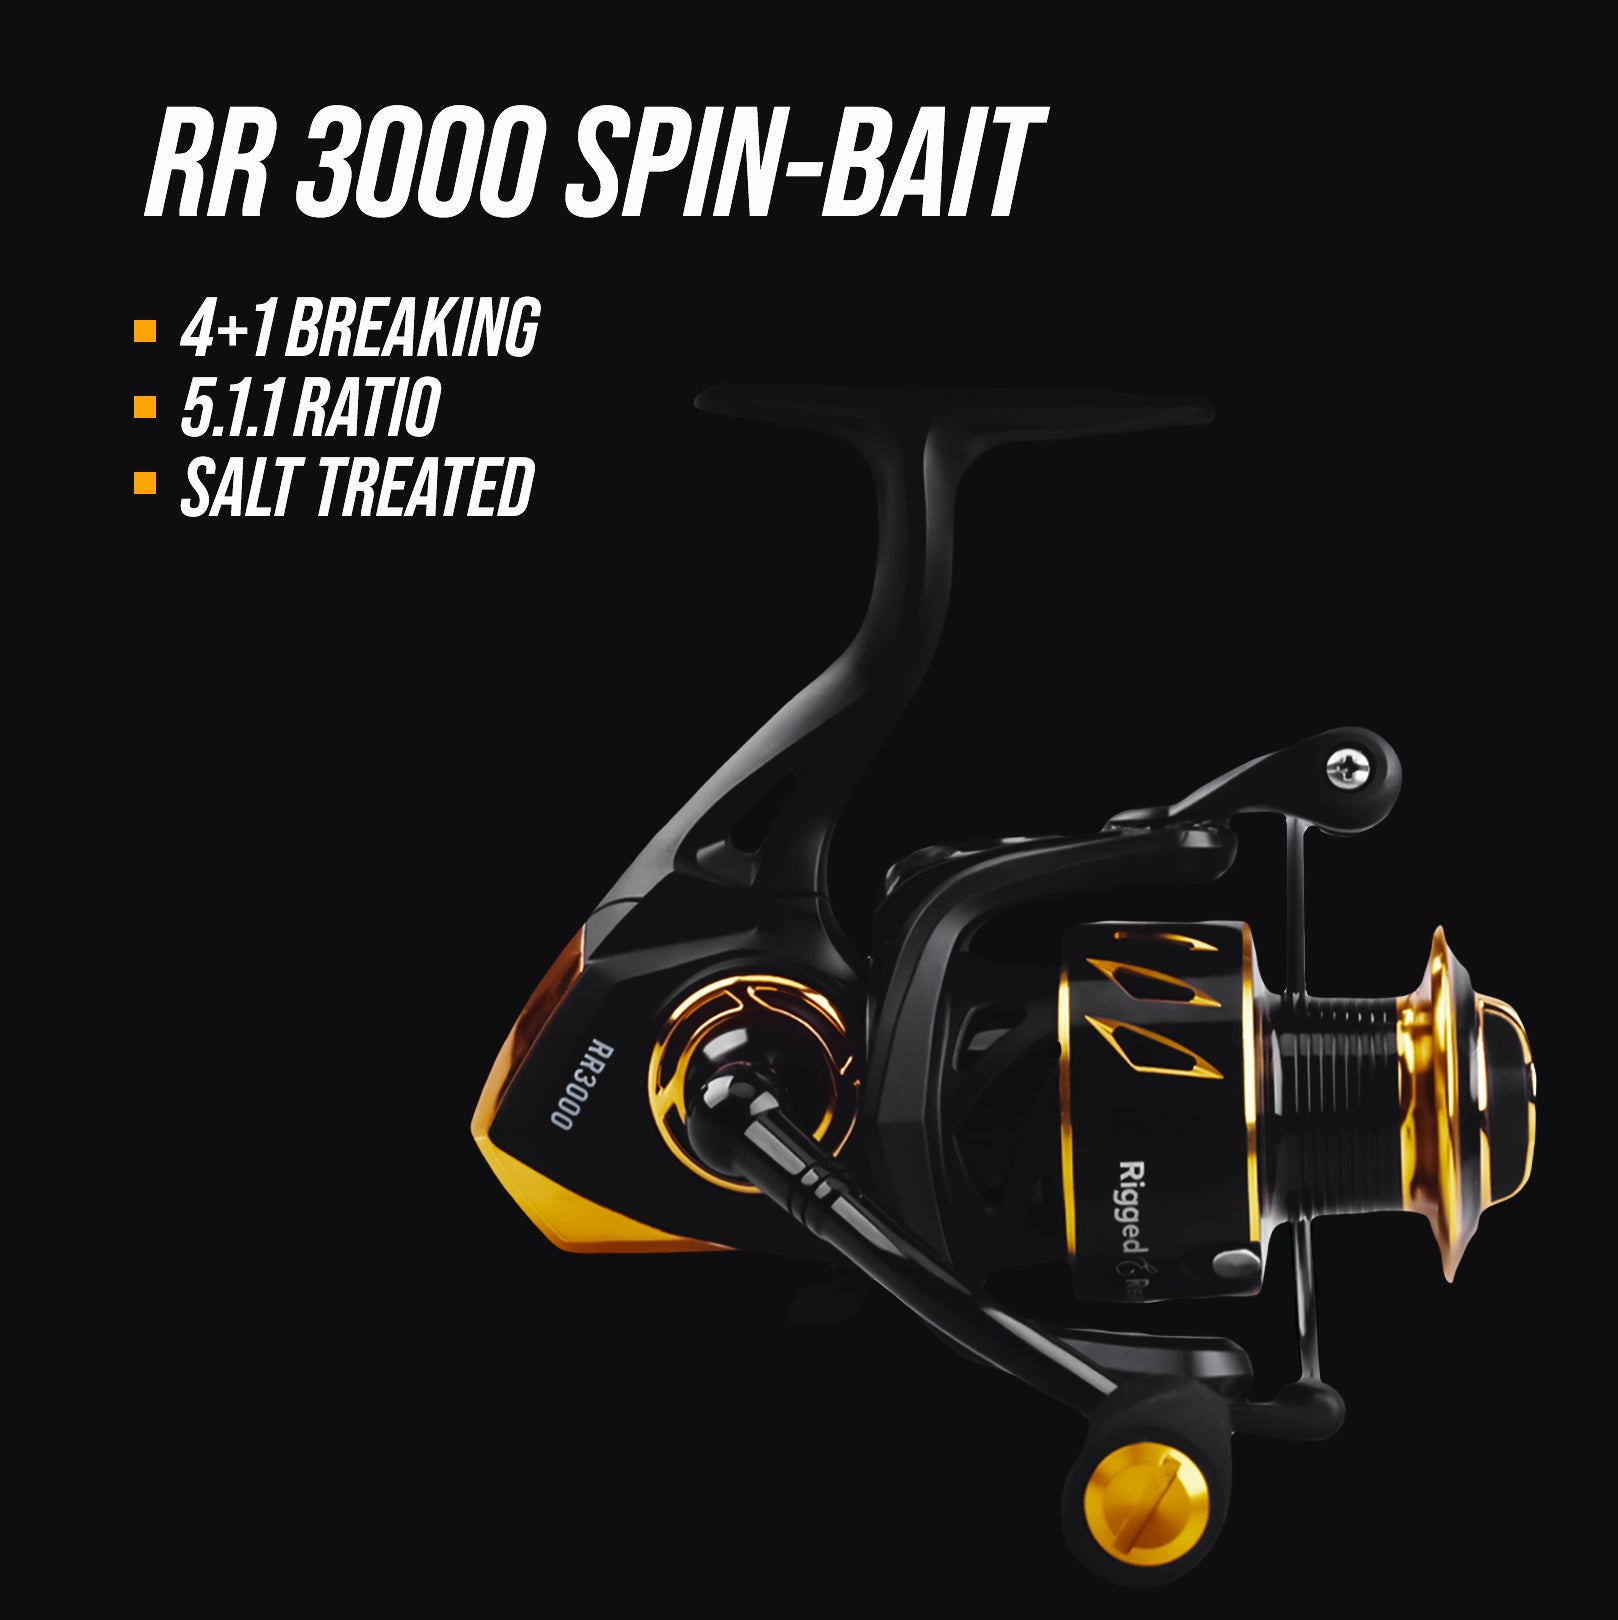 Florida Fishing Products Salos Spinning Reel 3000 - Andy Thornal